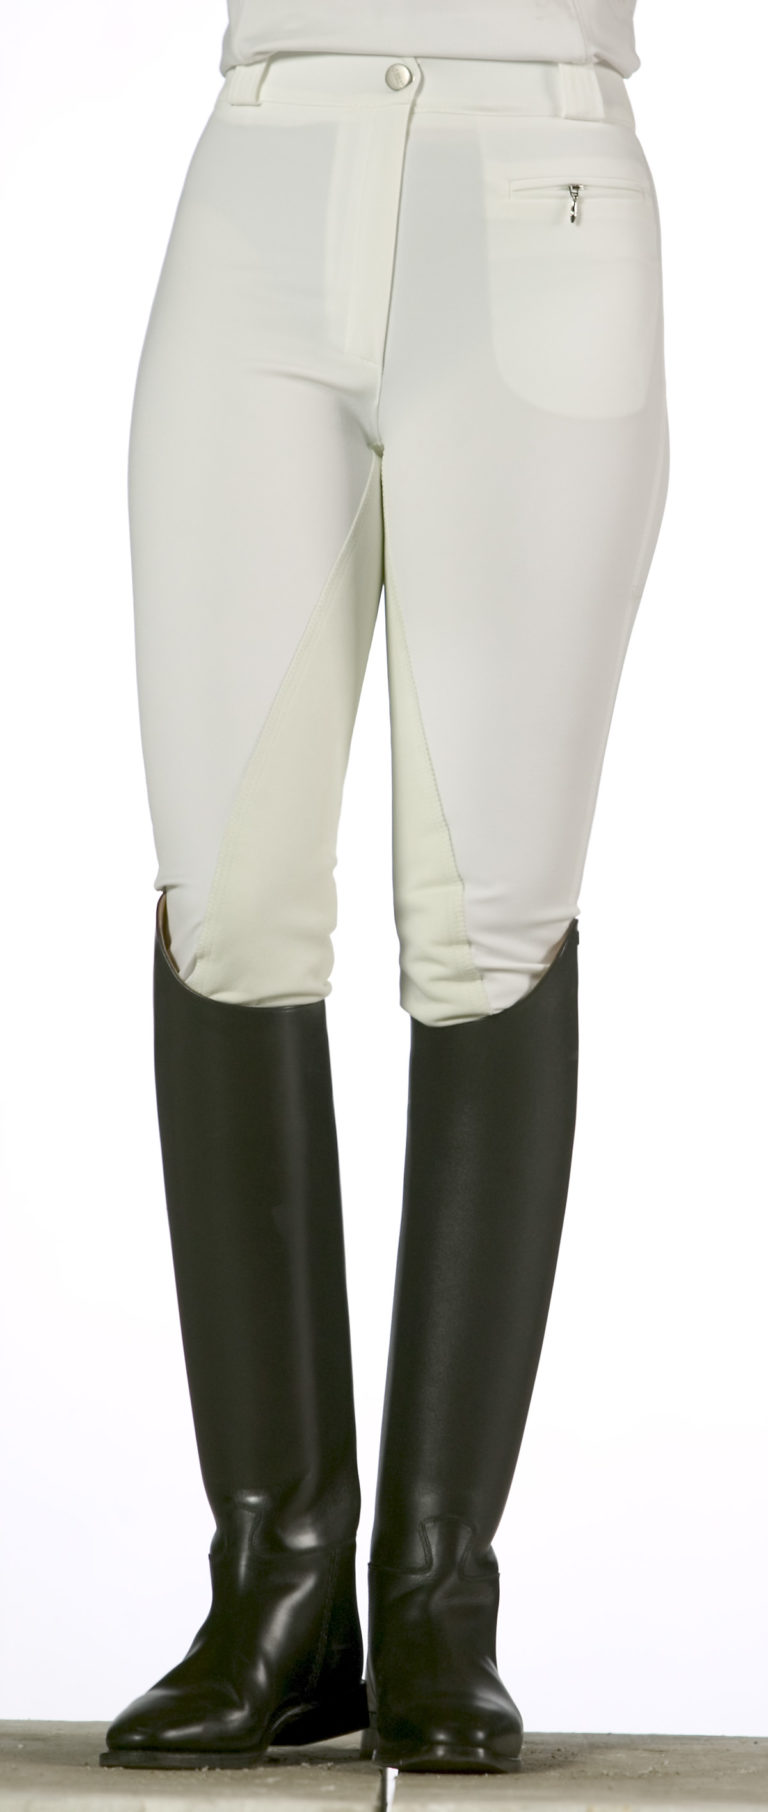 How Do I Get Yellow Stains Out of My White Breeches? promo image